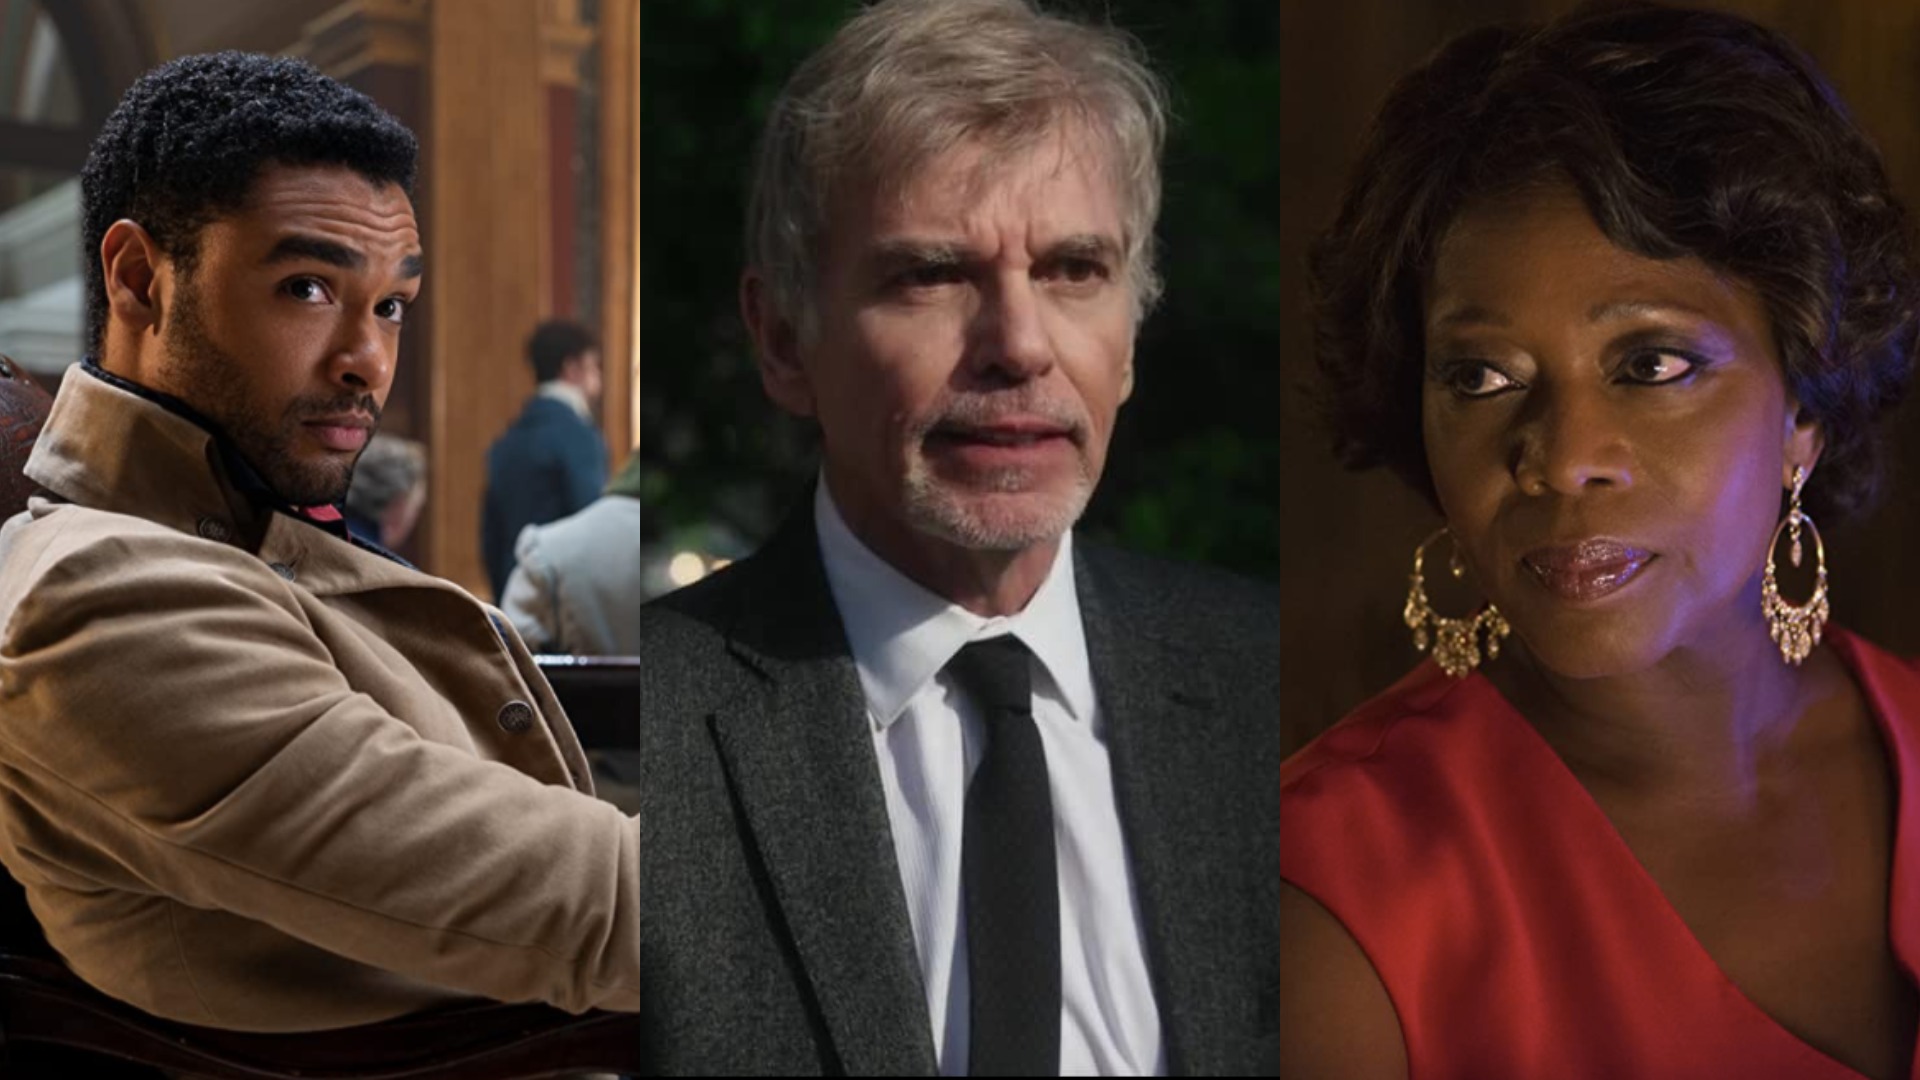 The Gray Man: Regé-Jean Page, Alfre Woodard, and more join Russo Bros film